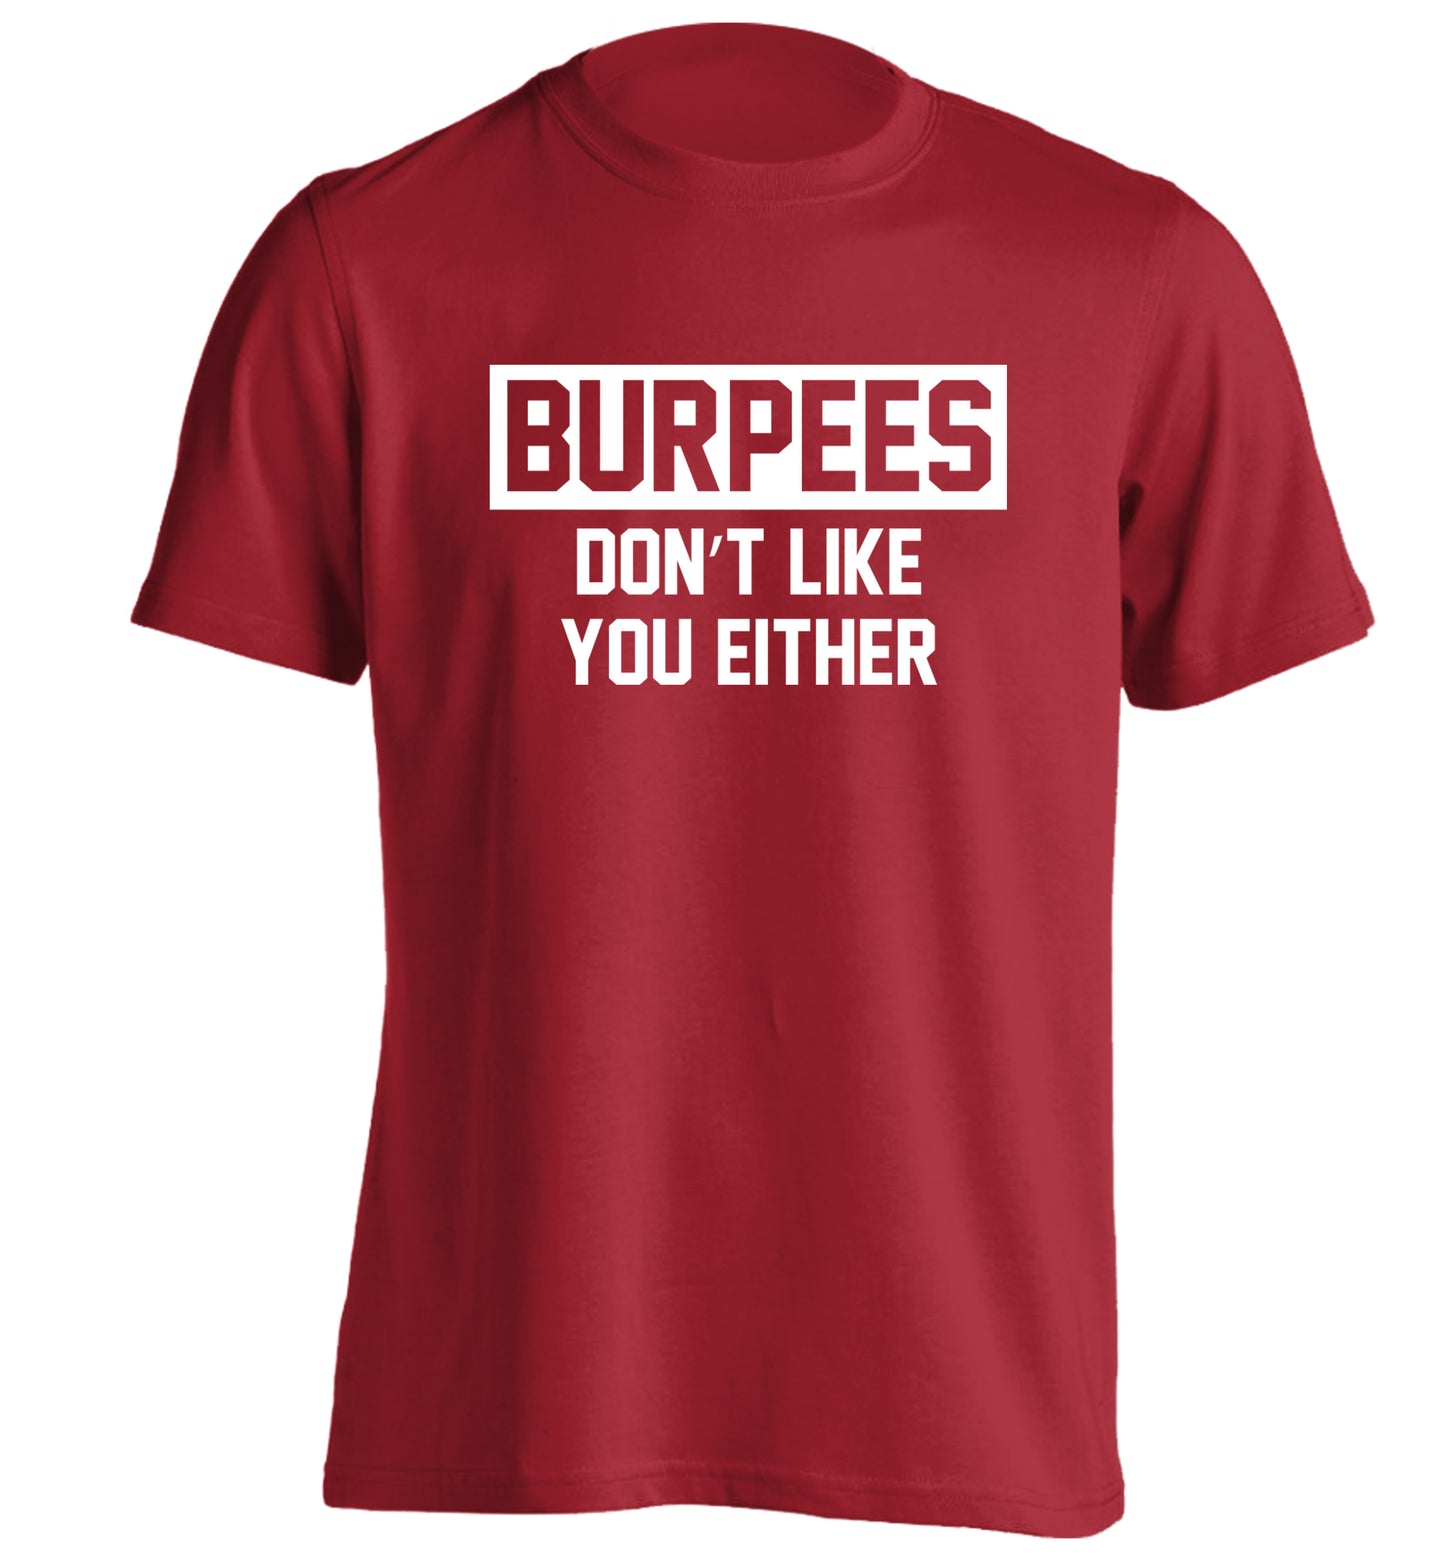 Burpees don't like you either adults unisex red Tshirt 2XL